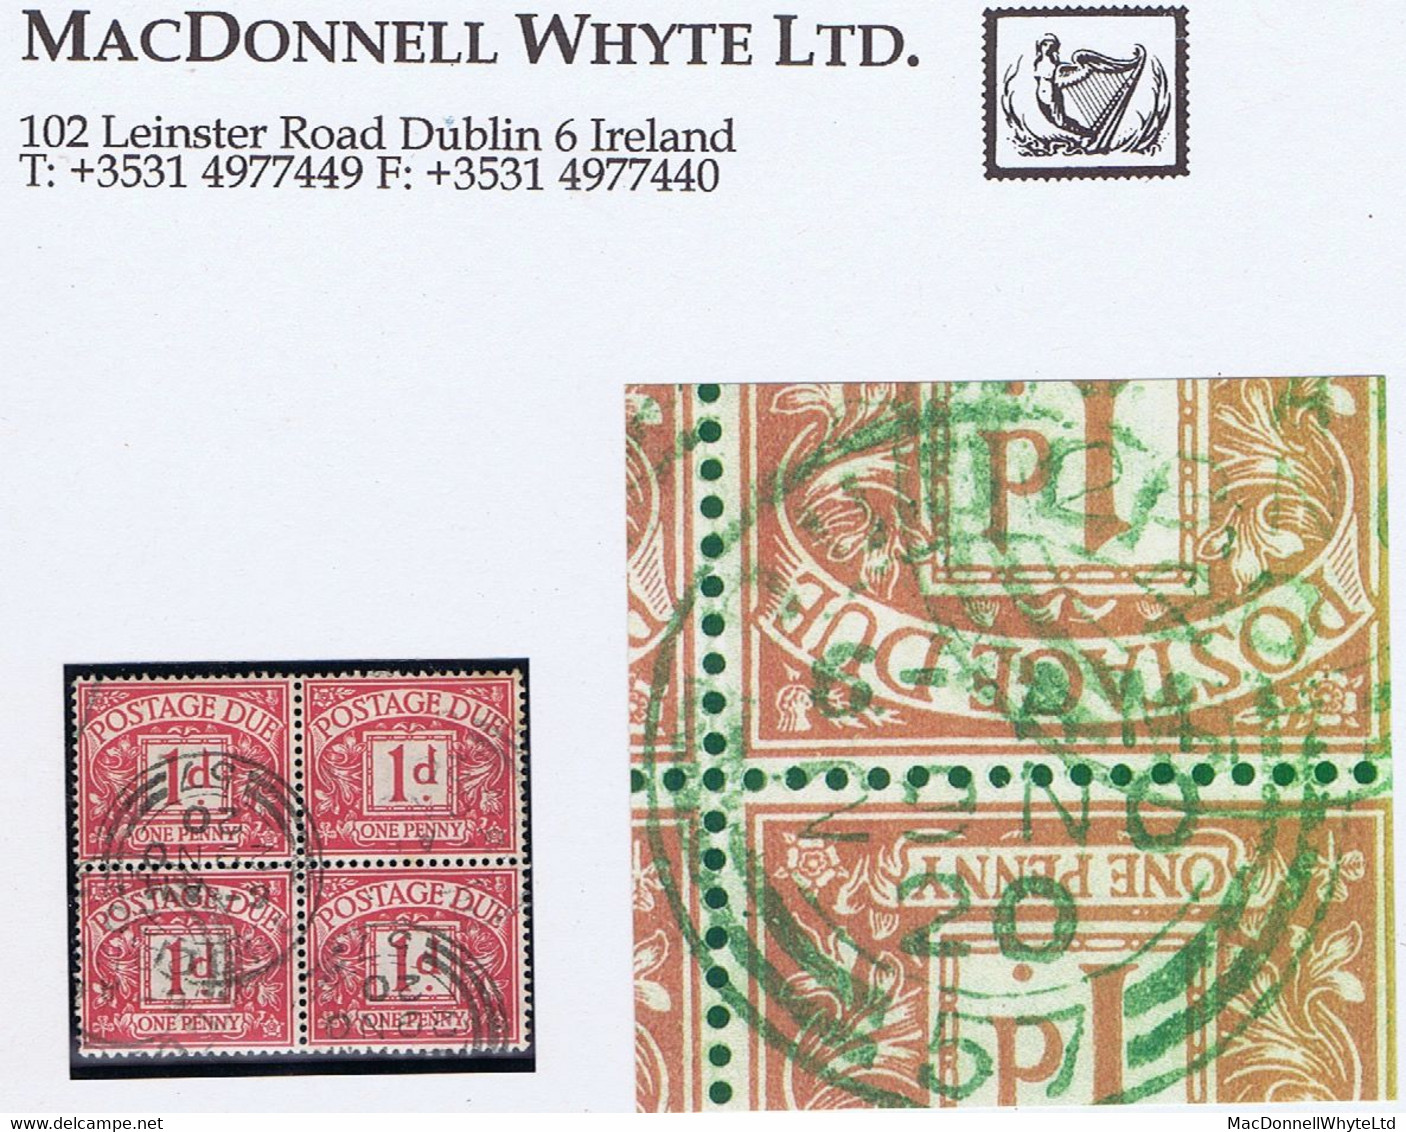 Ireland Postage Due 1920 British POSTAGE DUE 1d Block Of 4 Used With Cds DUBLIN 29 NO 20 Code 57 - Portomarken